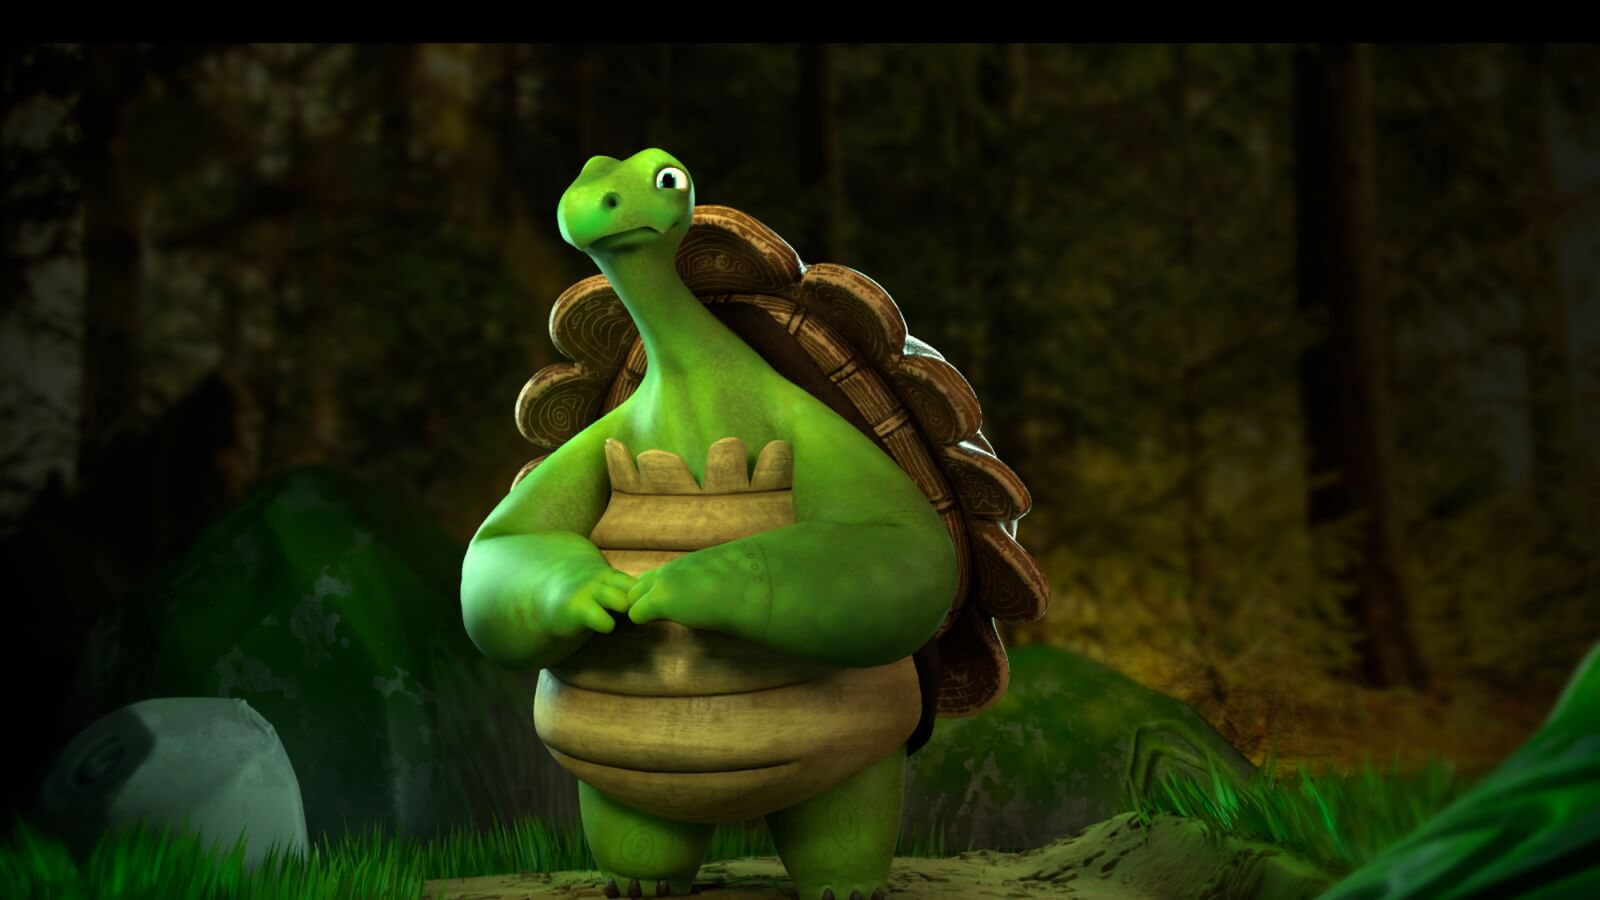 A giant friendly turtle stands upright in a dense forest, surrounded by tall trees.